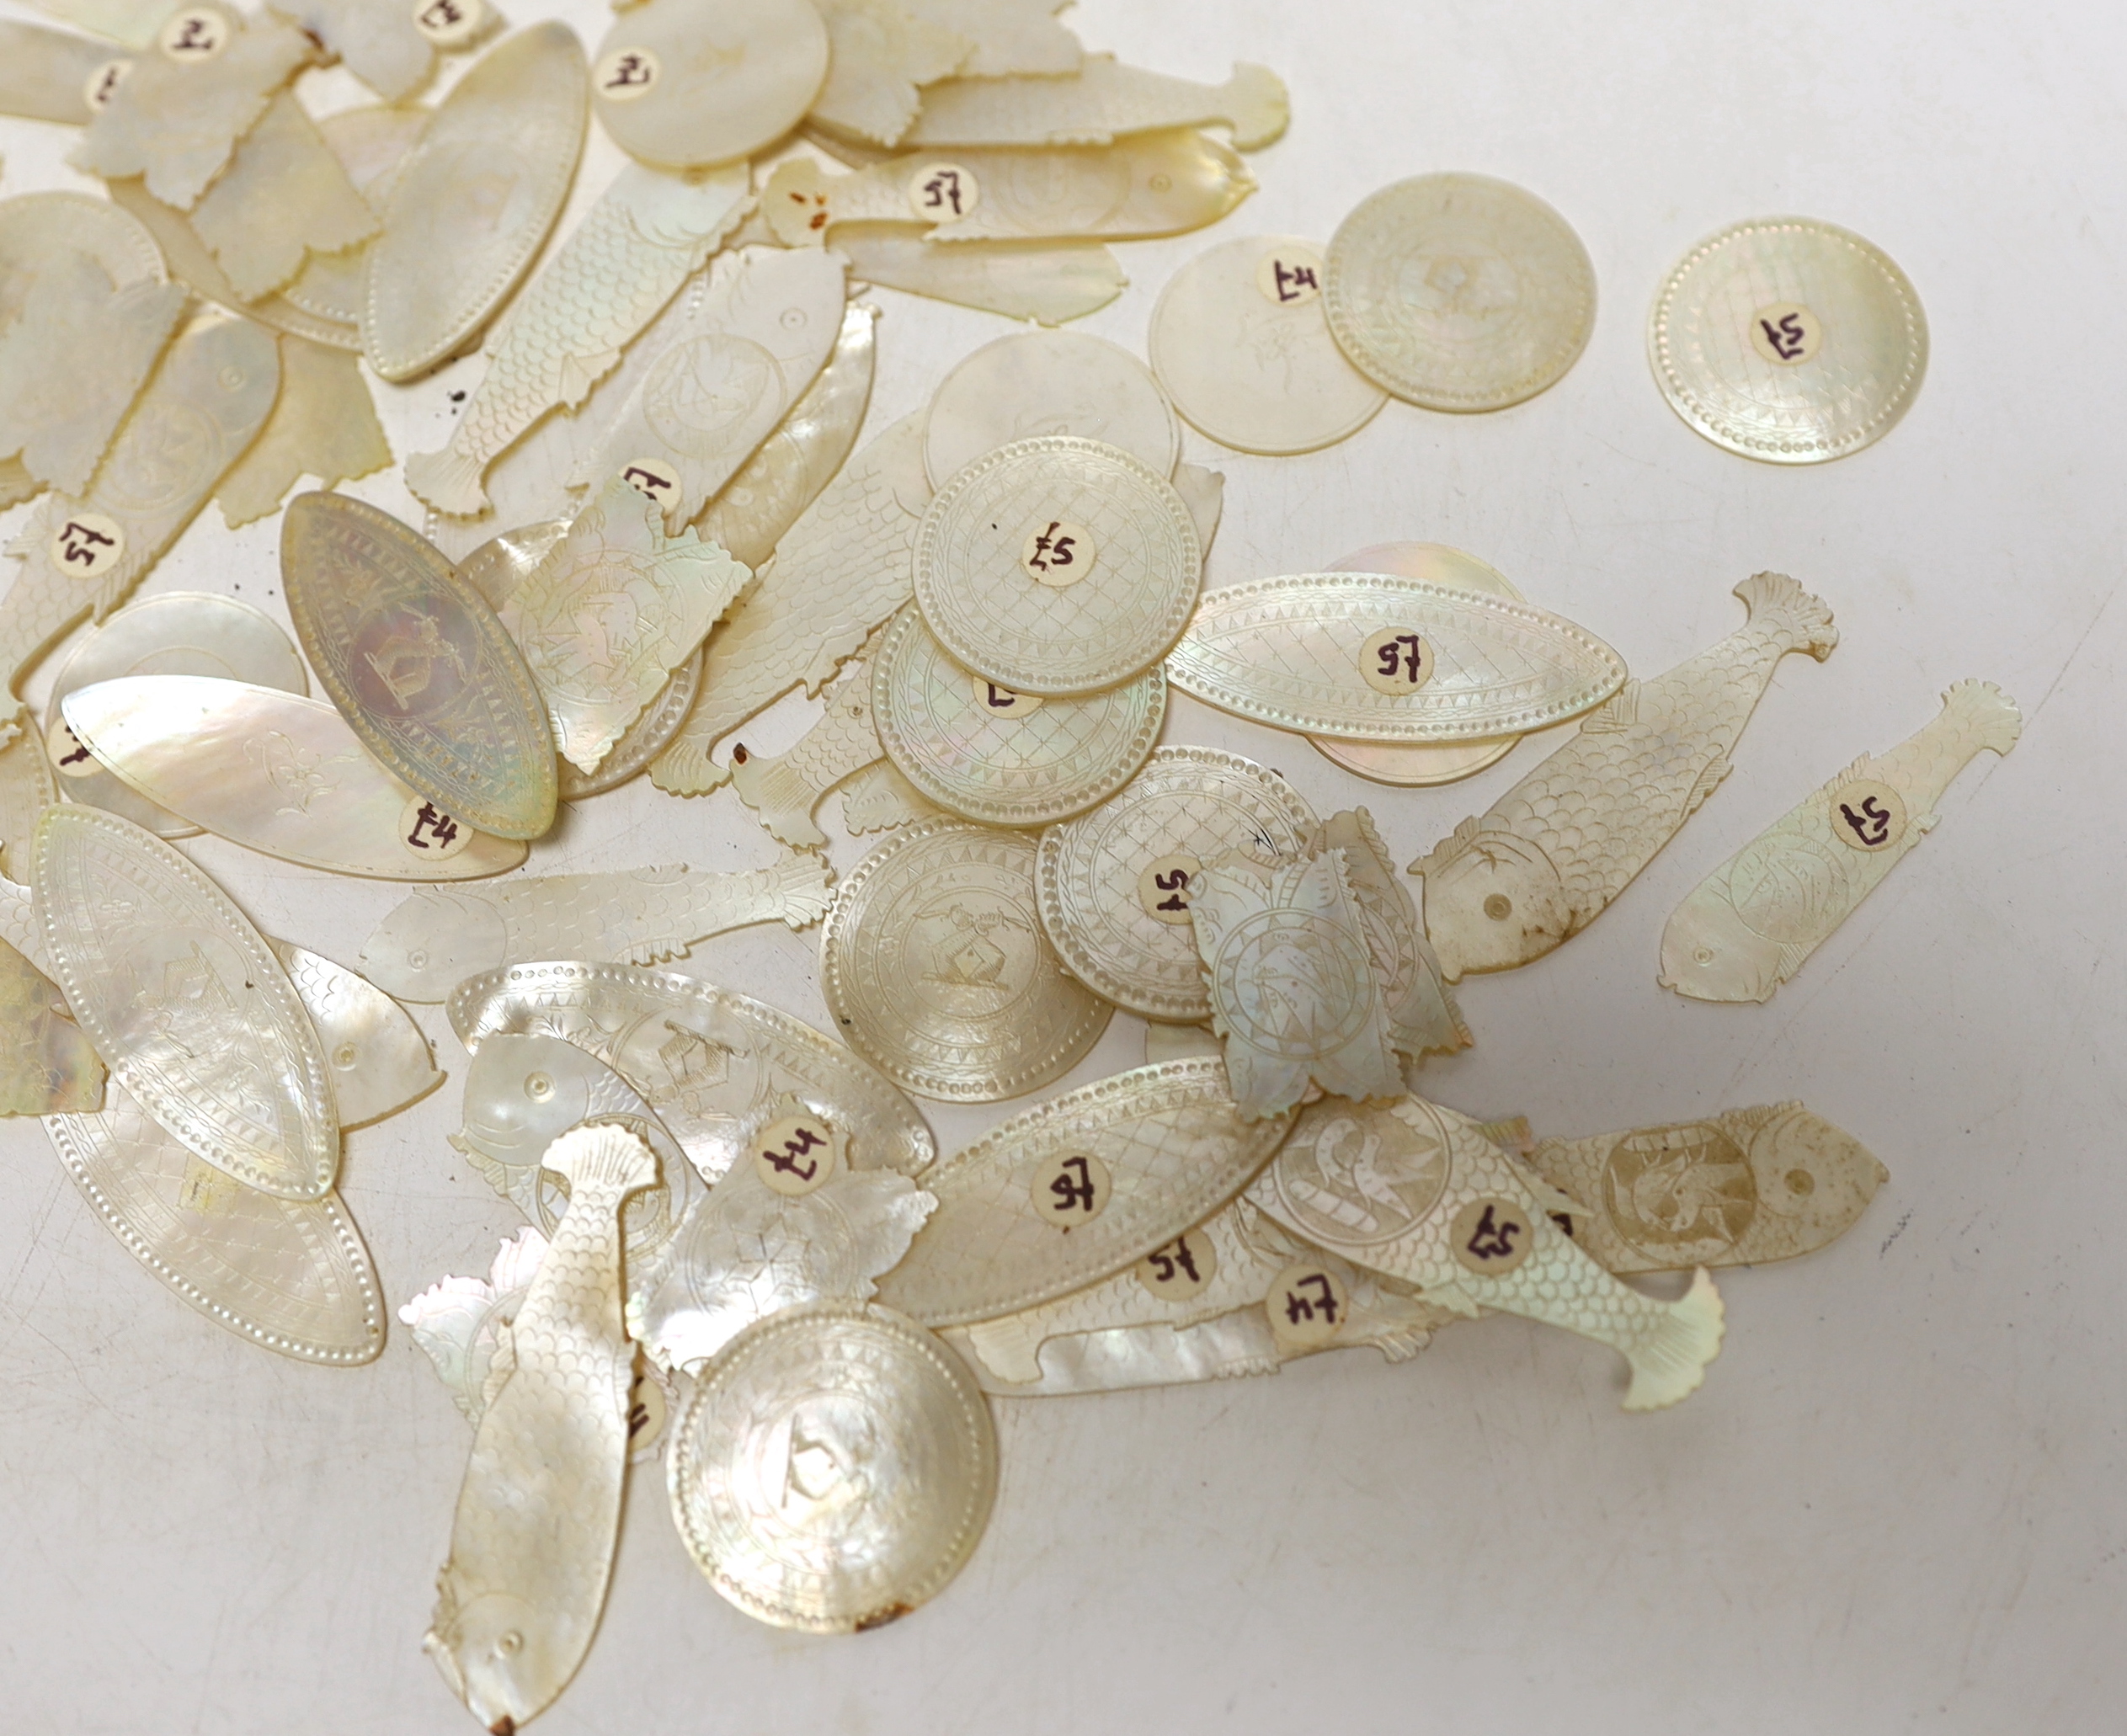 A collection of Chinese mother of pearl gaming counters